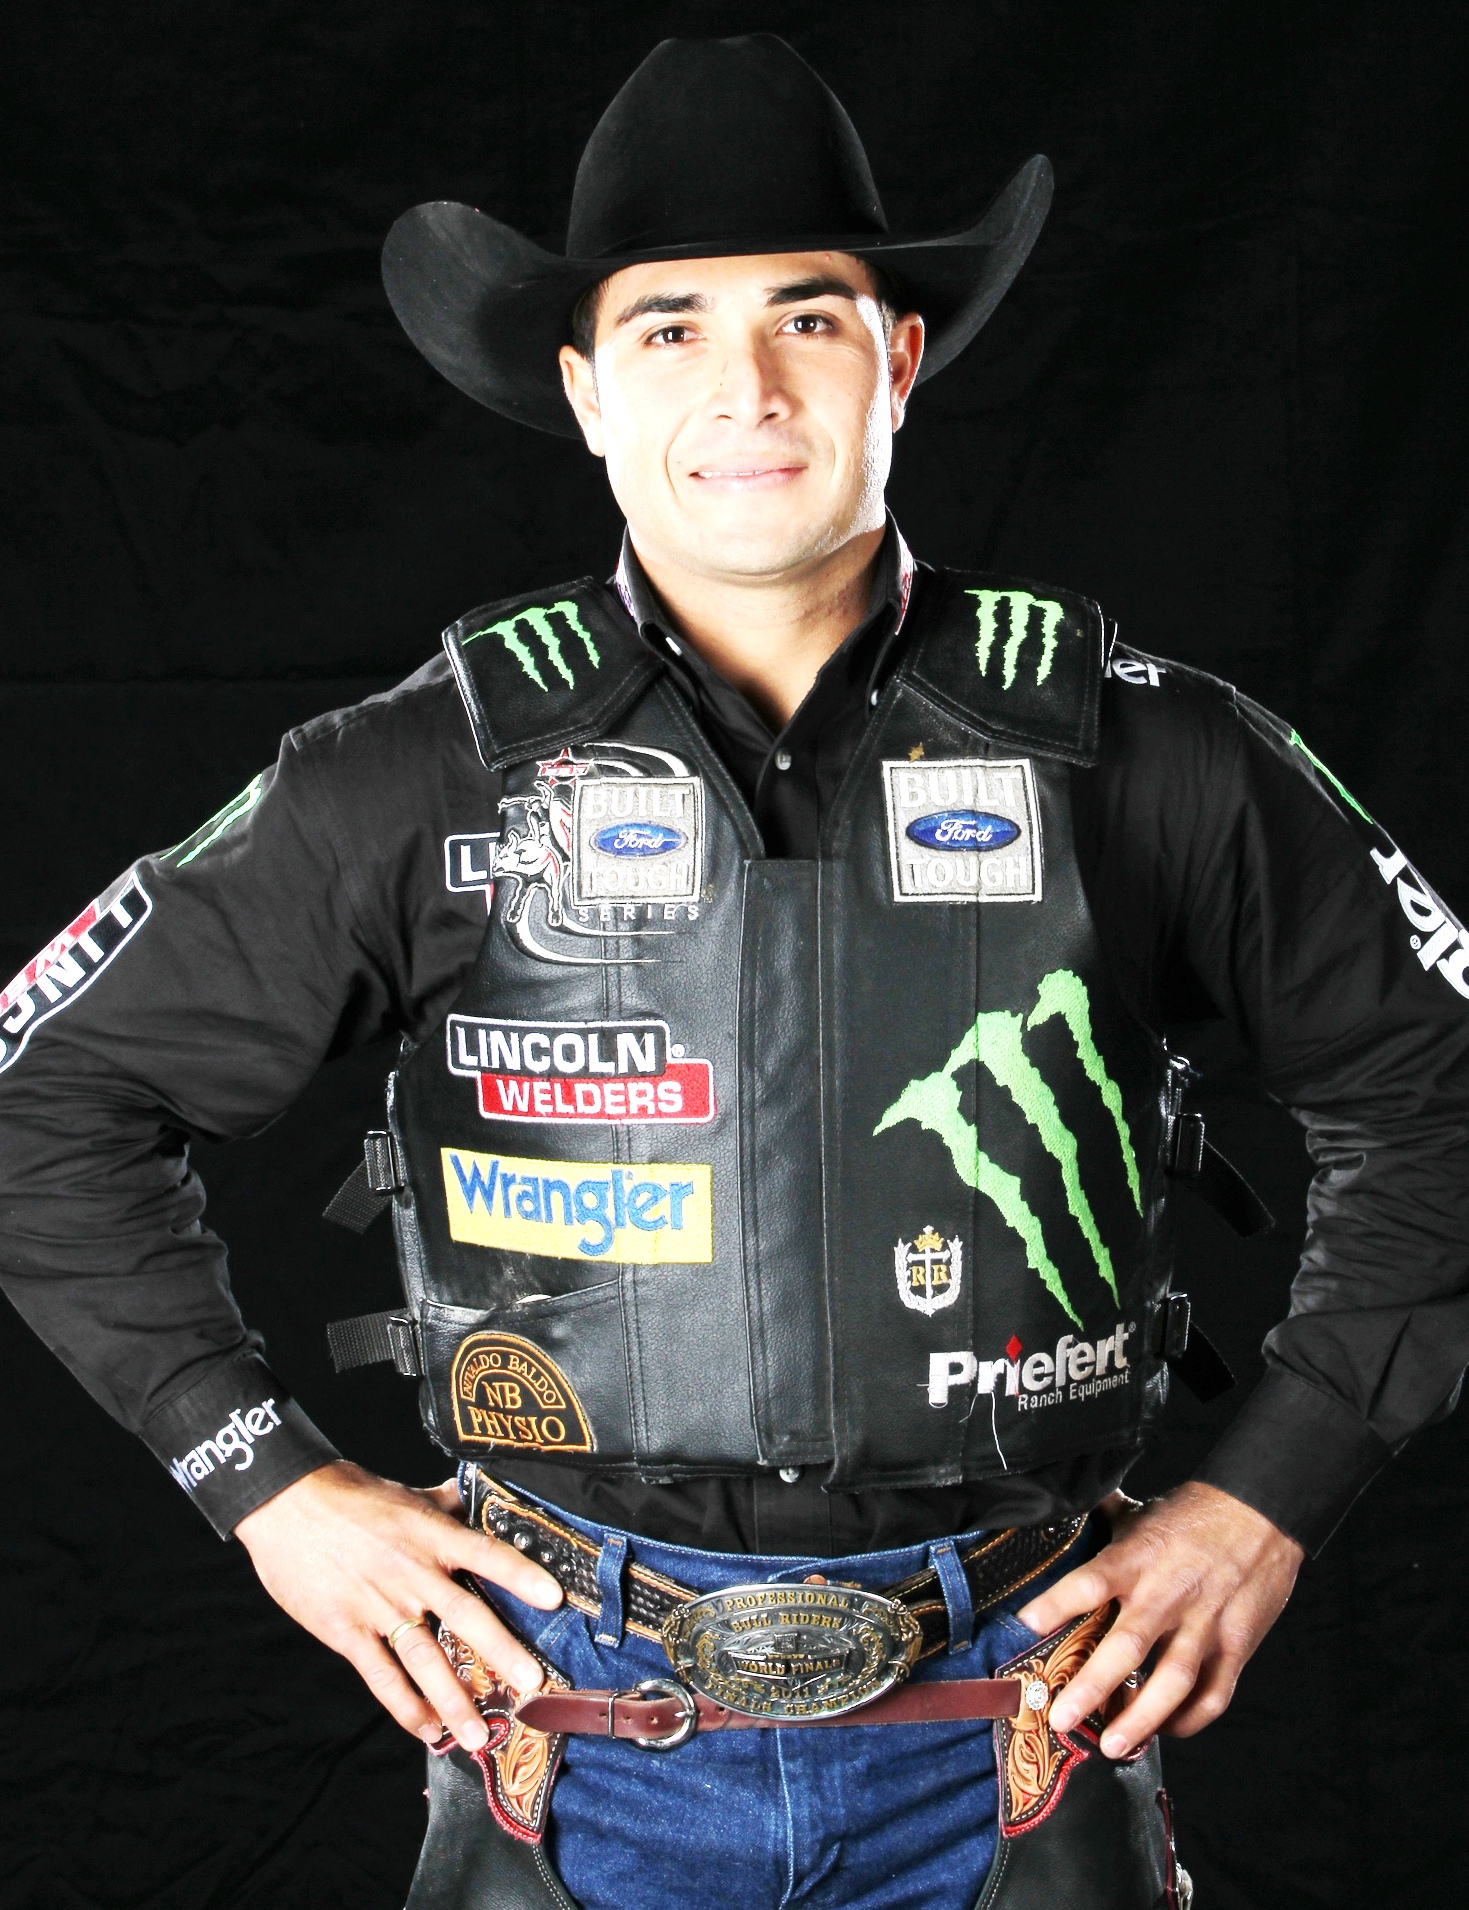 Top bull rider happy to be back in S.A. San Antonio ExpressNews